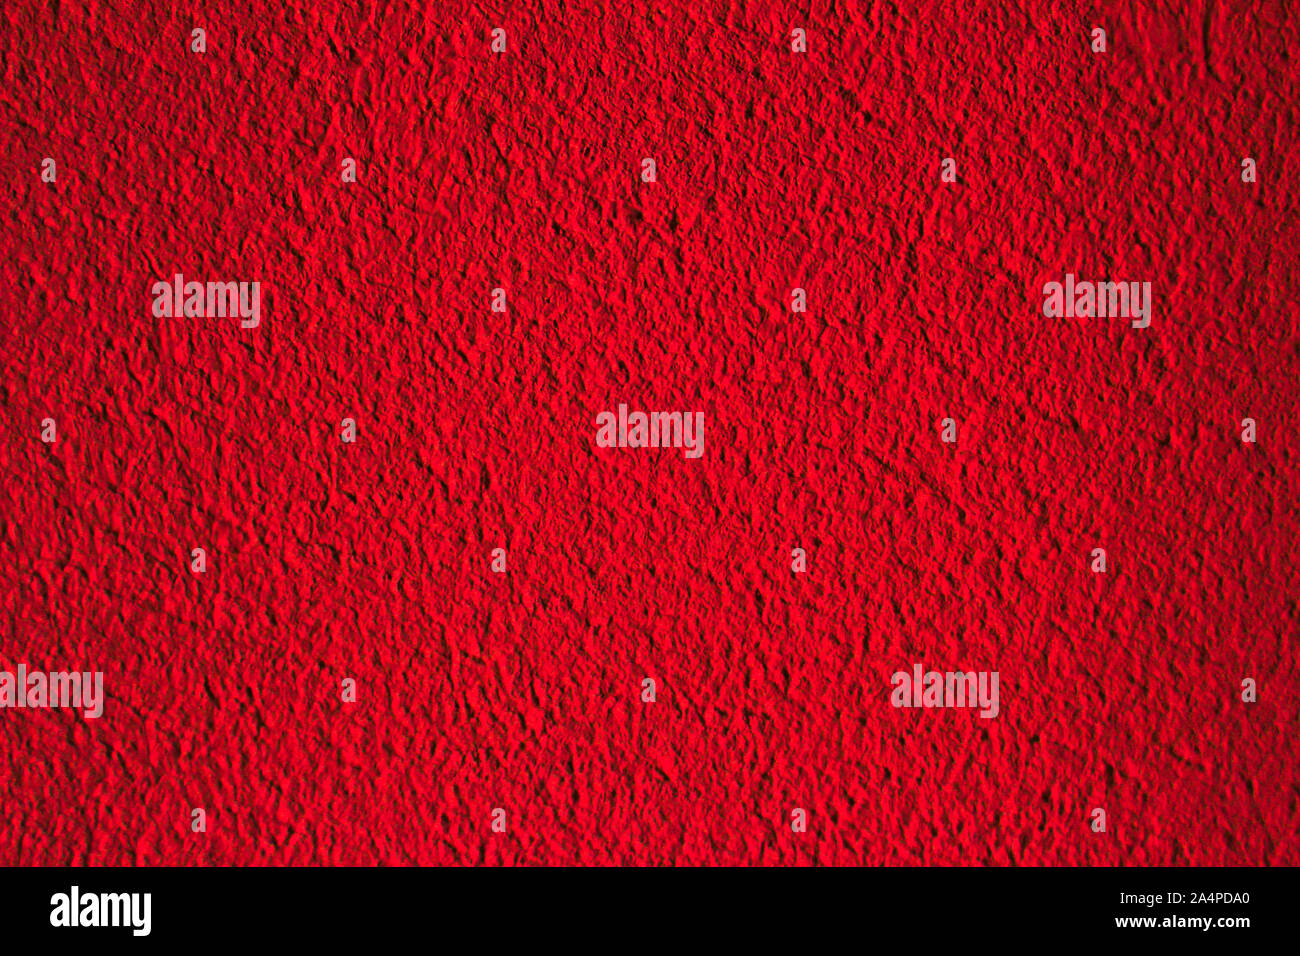 Bright red wall texture for background or wallpaper Stock Photo